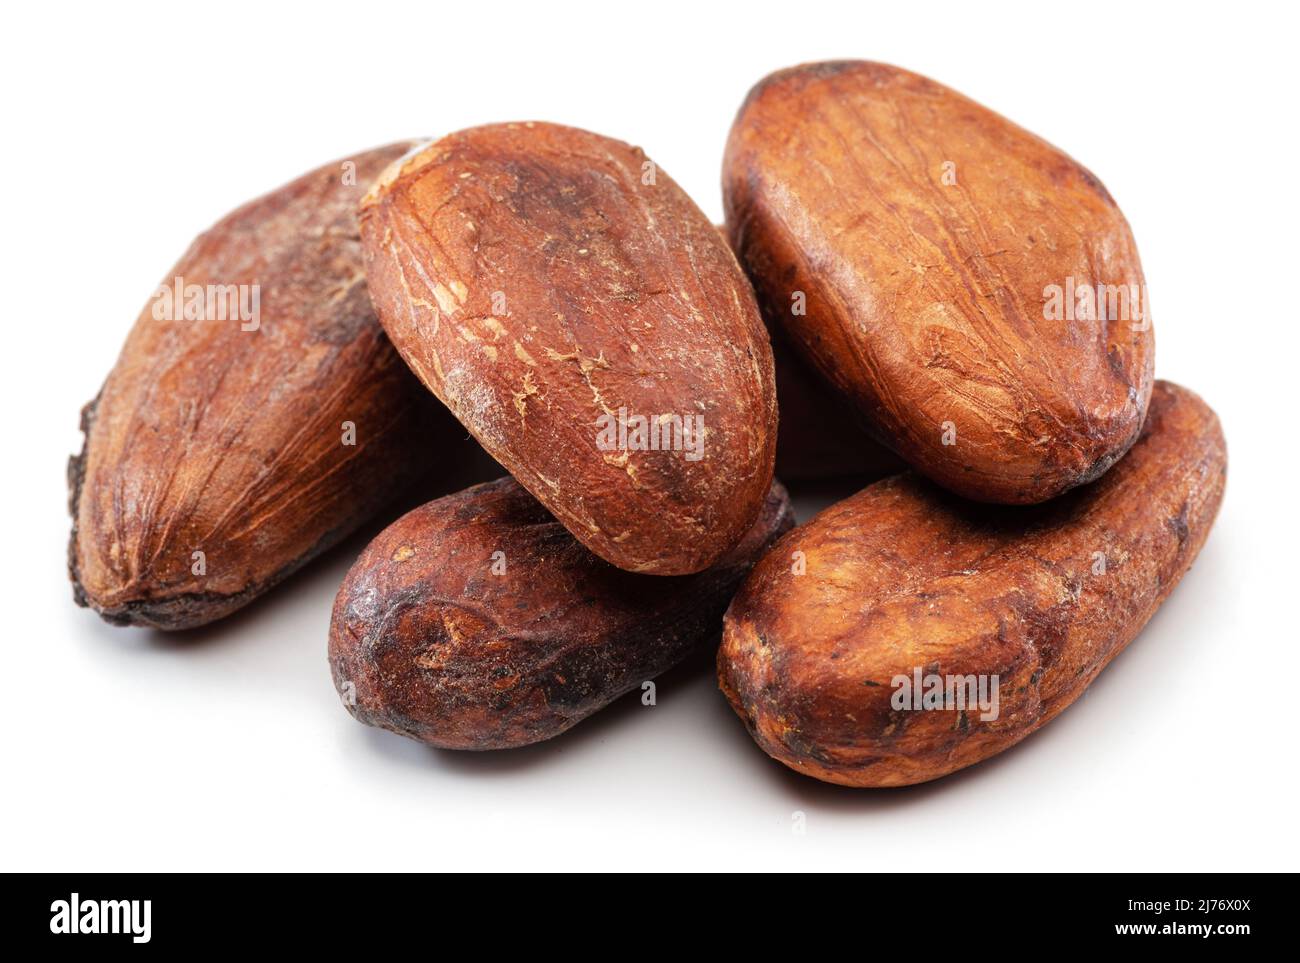 Cocoa beans close-up on white background. Stock Photo